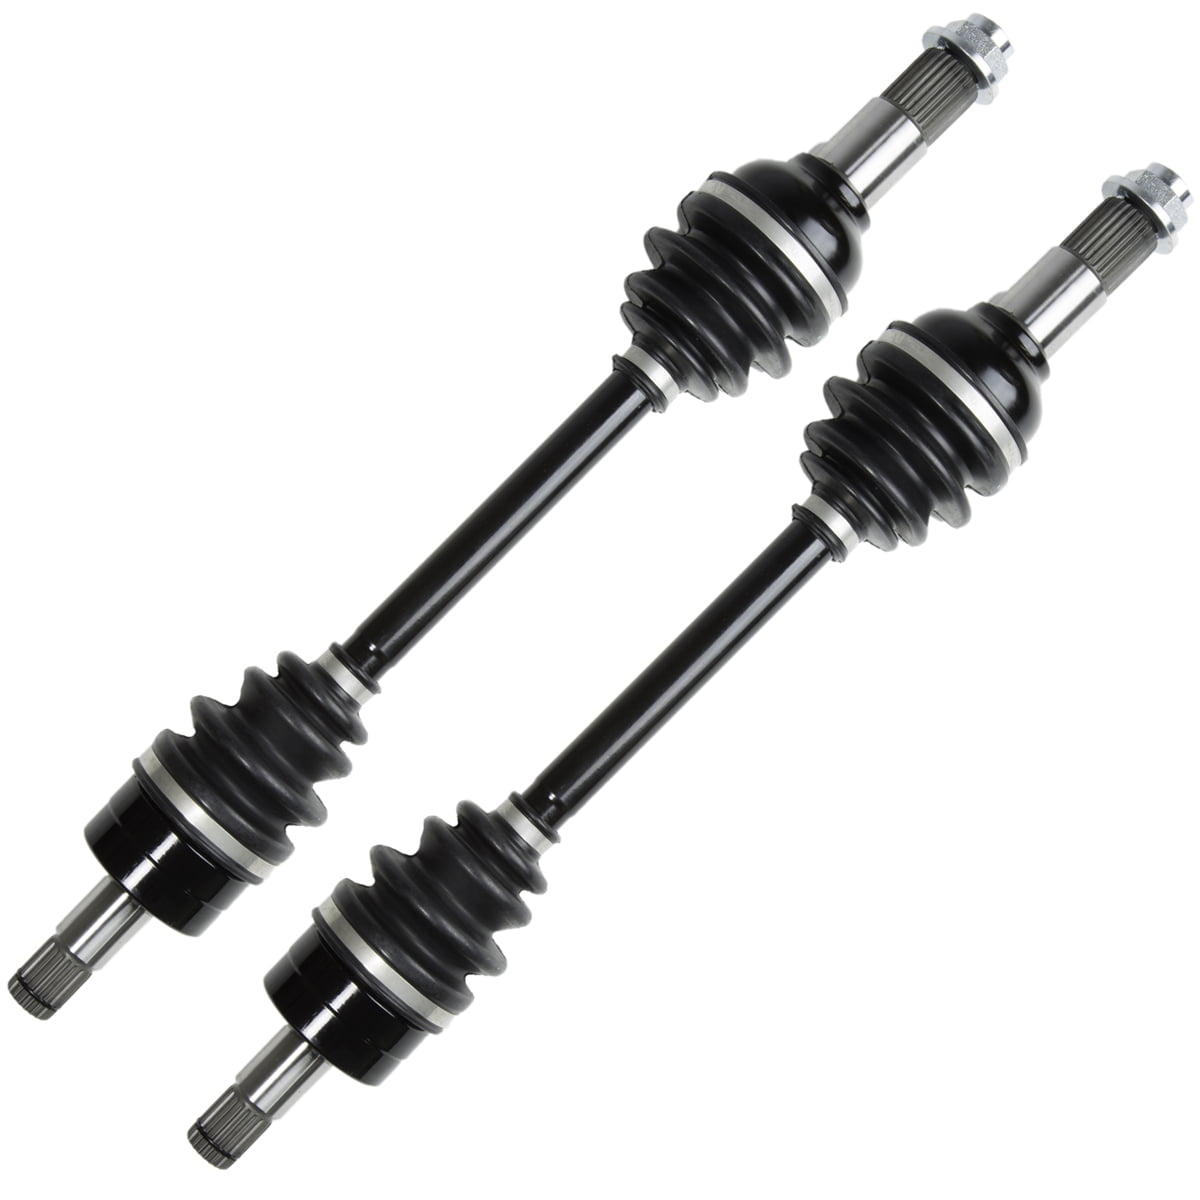 Yamaha Grizzly front left/right cv axle 550/700 2004 2005 2006 2007 2008 2009 2010 2011 2012 2013 2014 